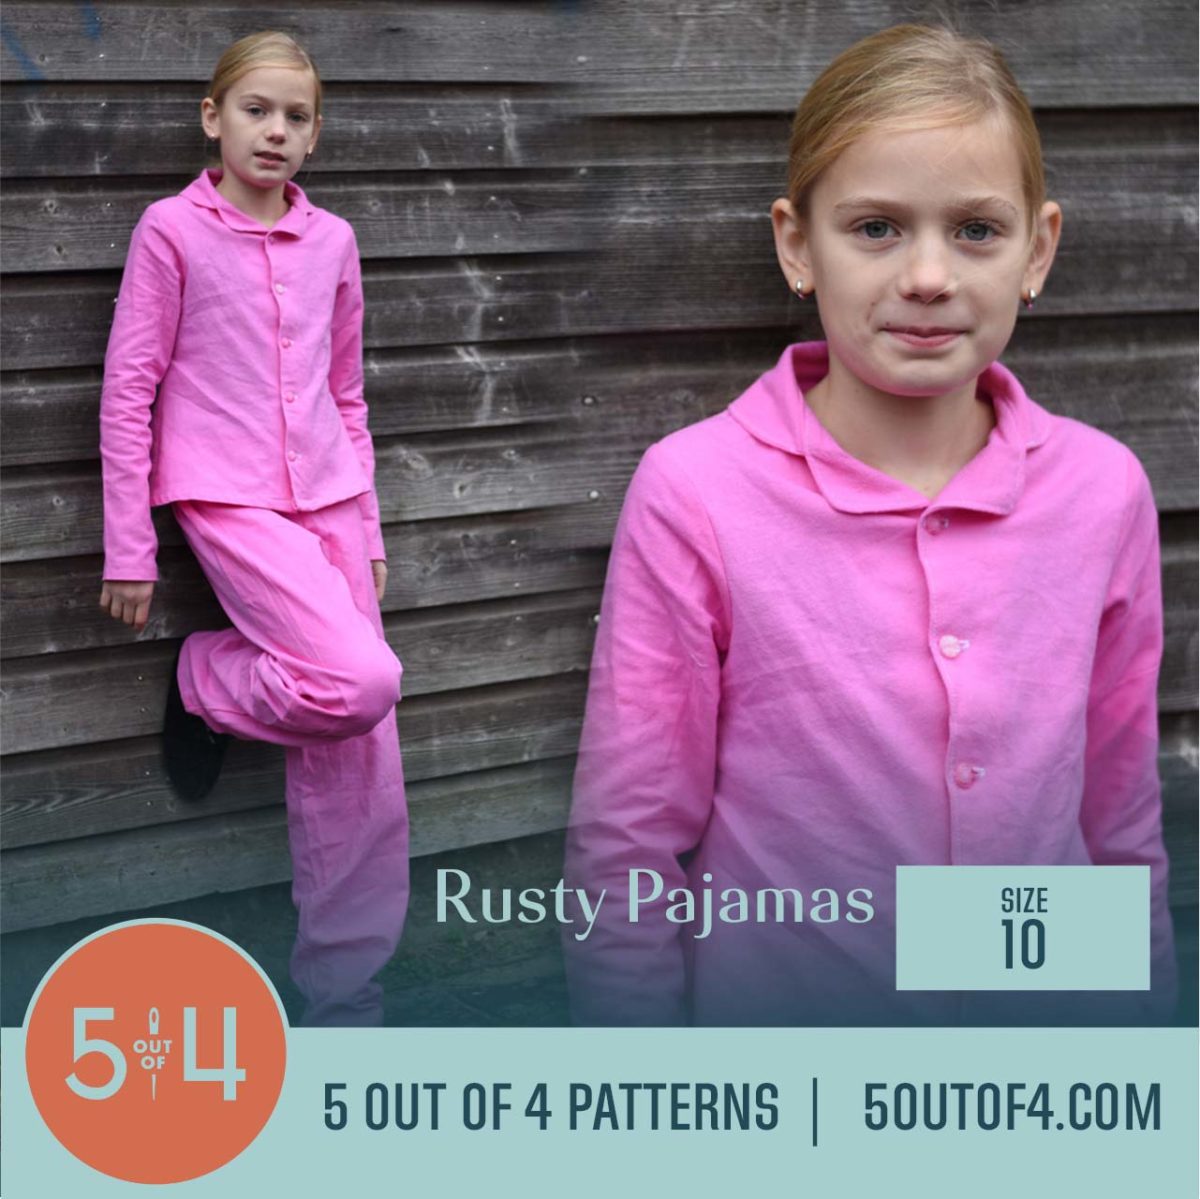 5oo4 Woven Pajama Pattern for Kids size 10